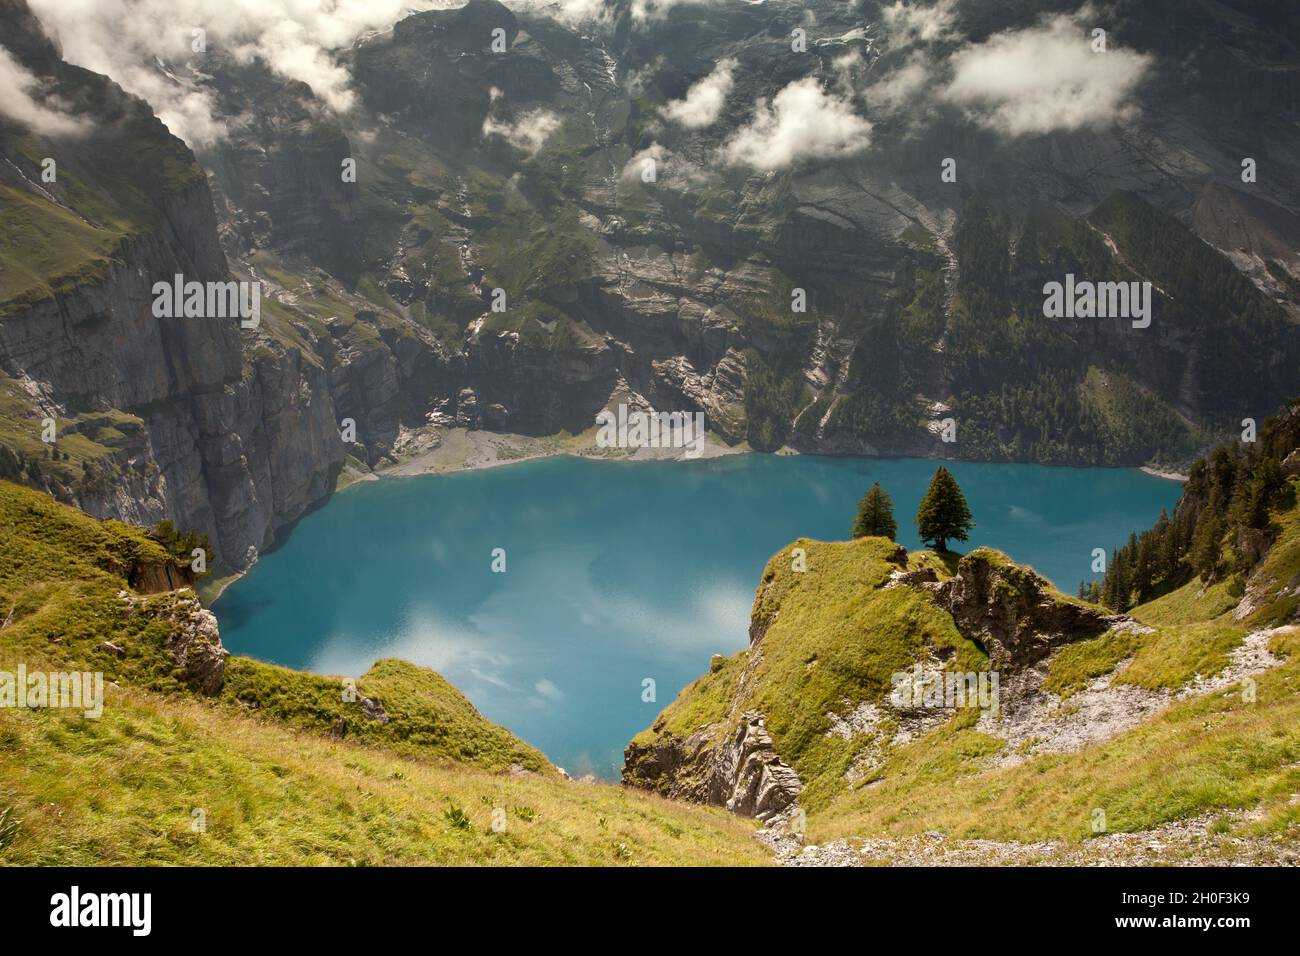 Oeschinen Lake with Larches Stock Photo